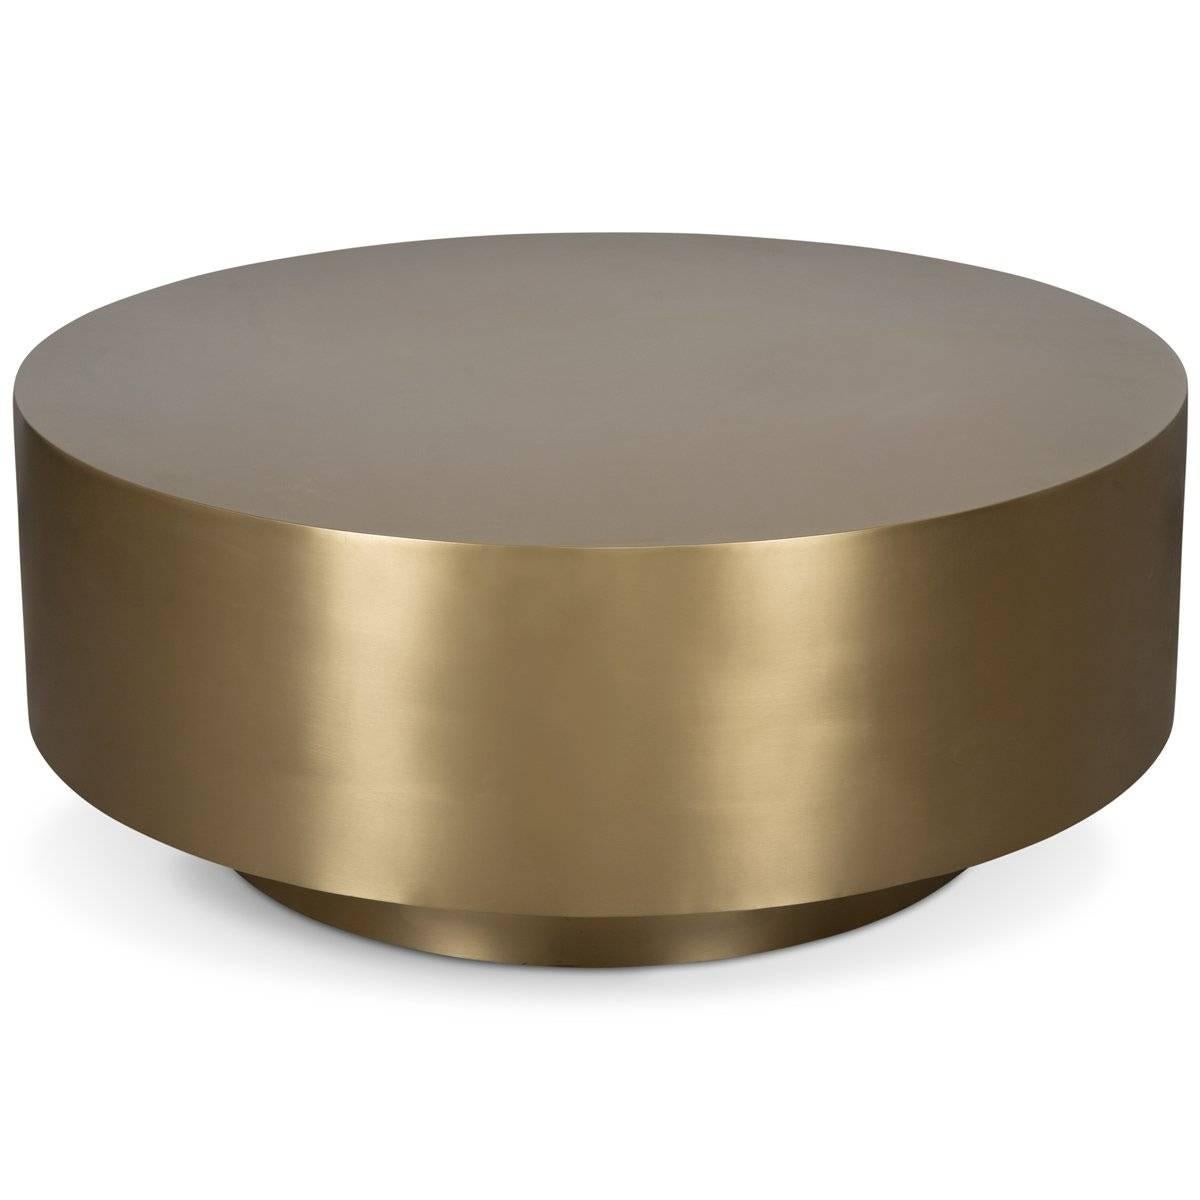 Our Ibiza coffee table is the perfect addition to your living room. This piece features an all brushed brass case and top.

Dimensions:
41.5